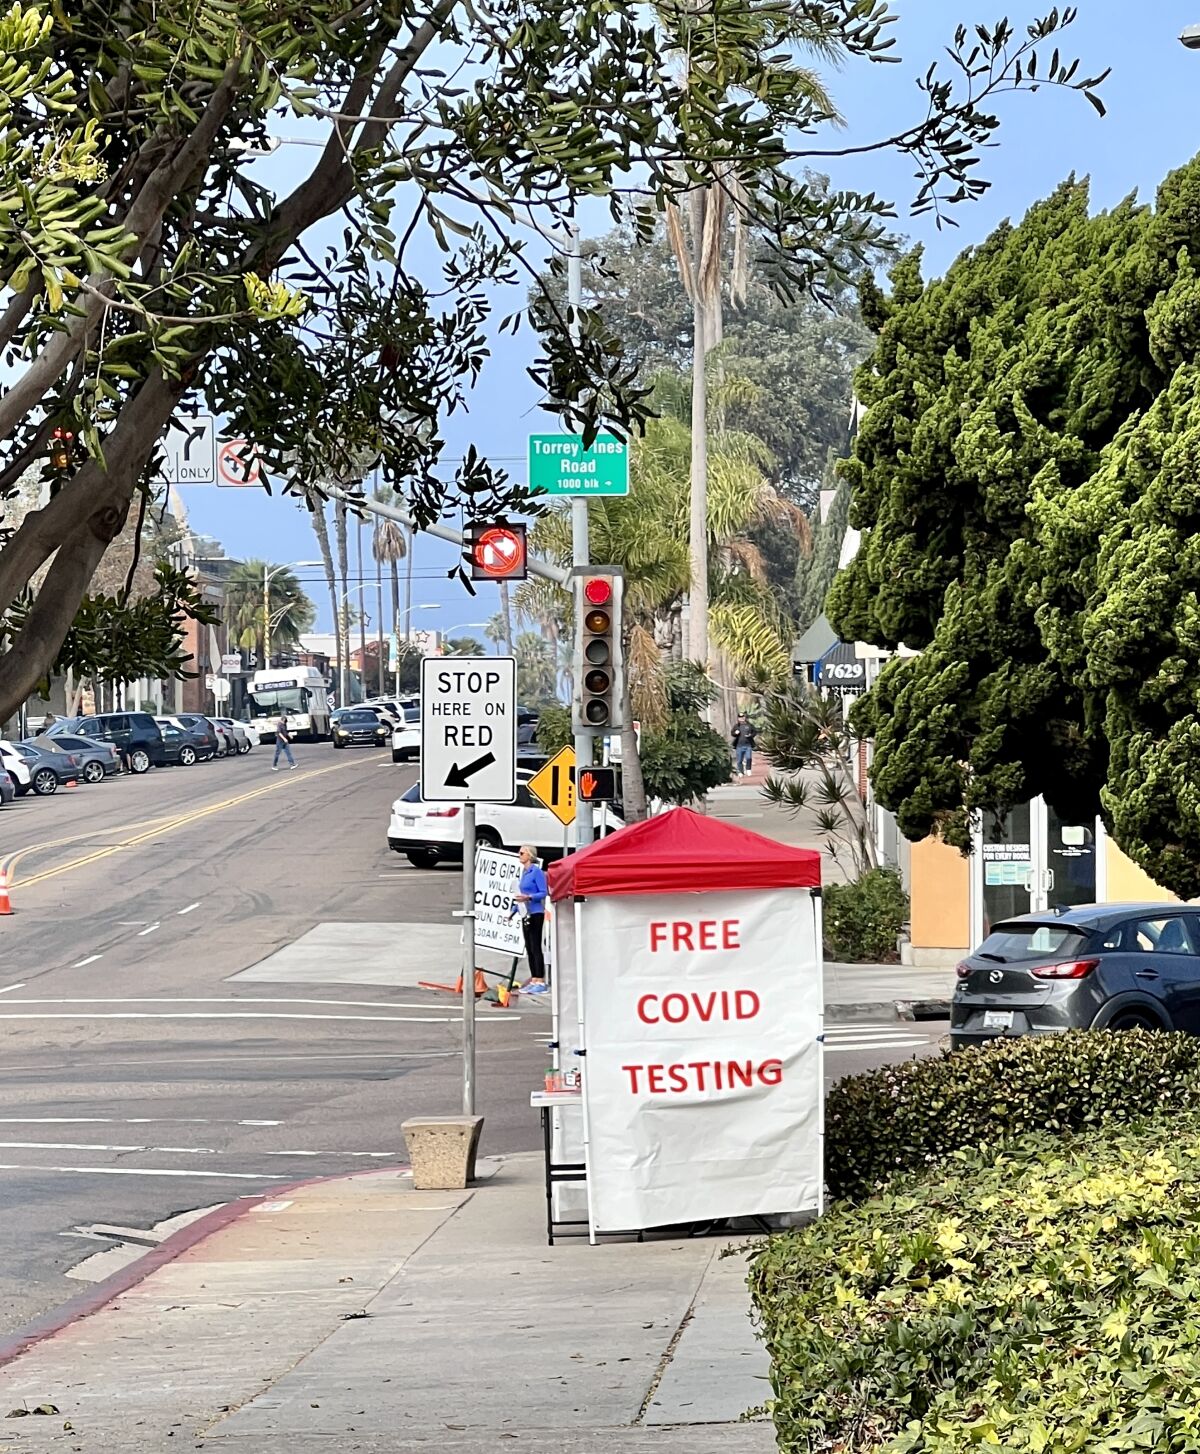 A tent at Girard Avenue and Torrey Pines Road in La Jolla offers free COVID-19 coronavirus testing.